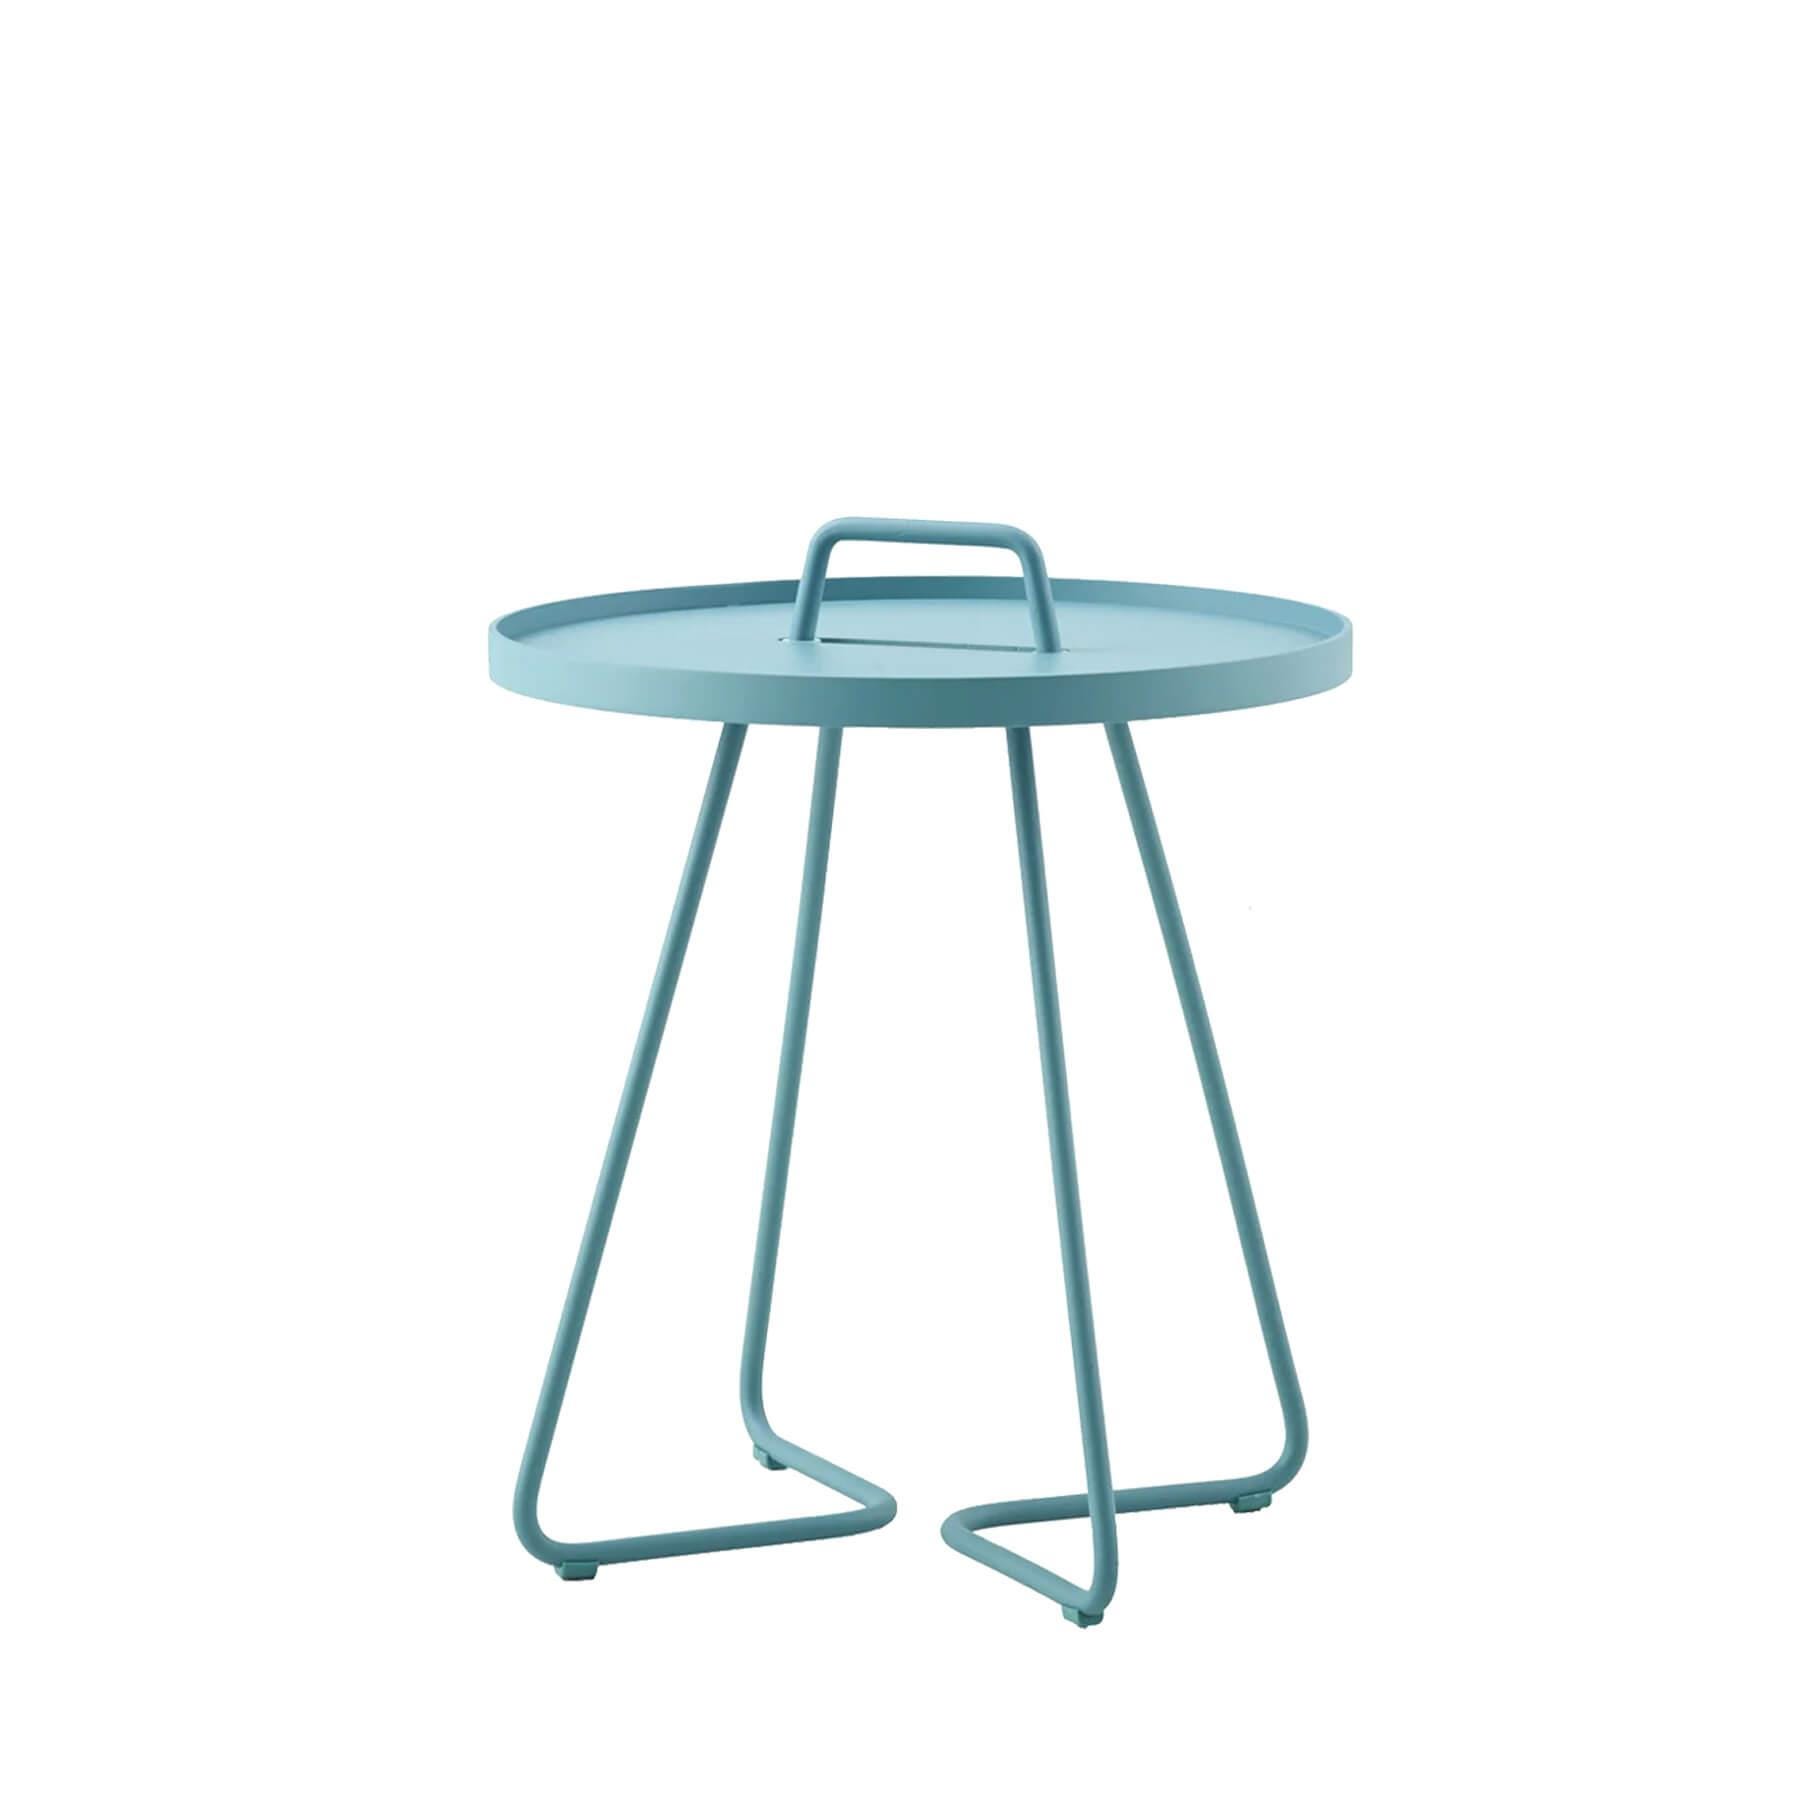 Caneline On The Move Side Table Small Aqua Blue Designer Furniture From Holloways Of Ludlow